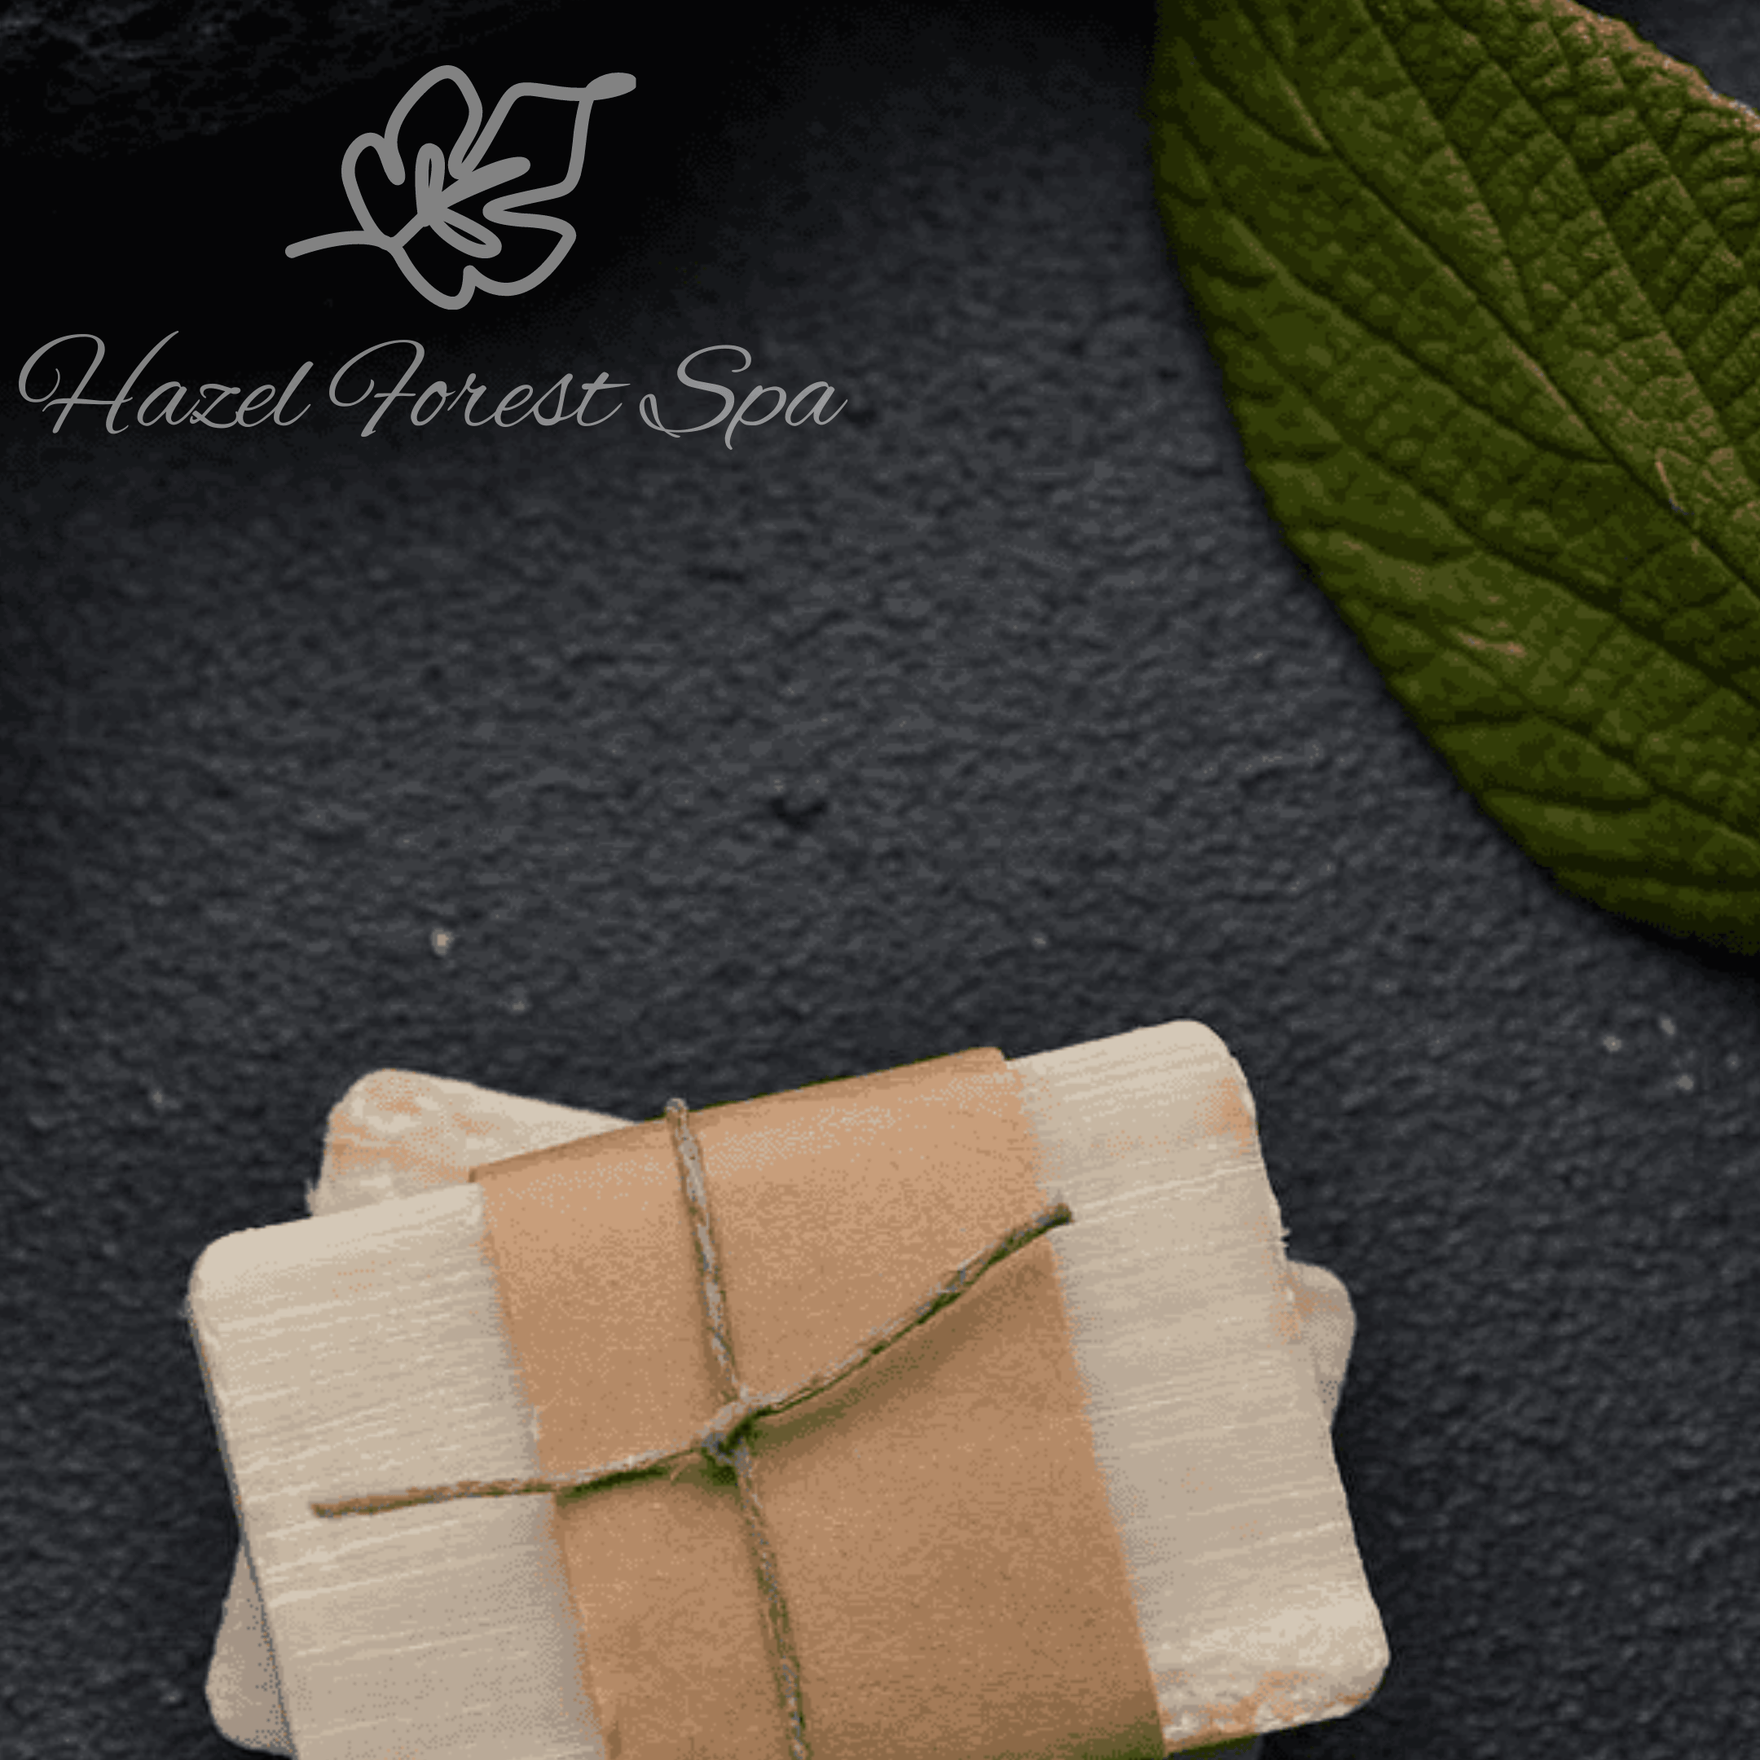 Spa Watermark Template in PSD, PNG